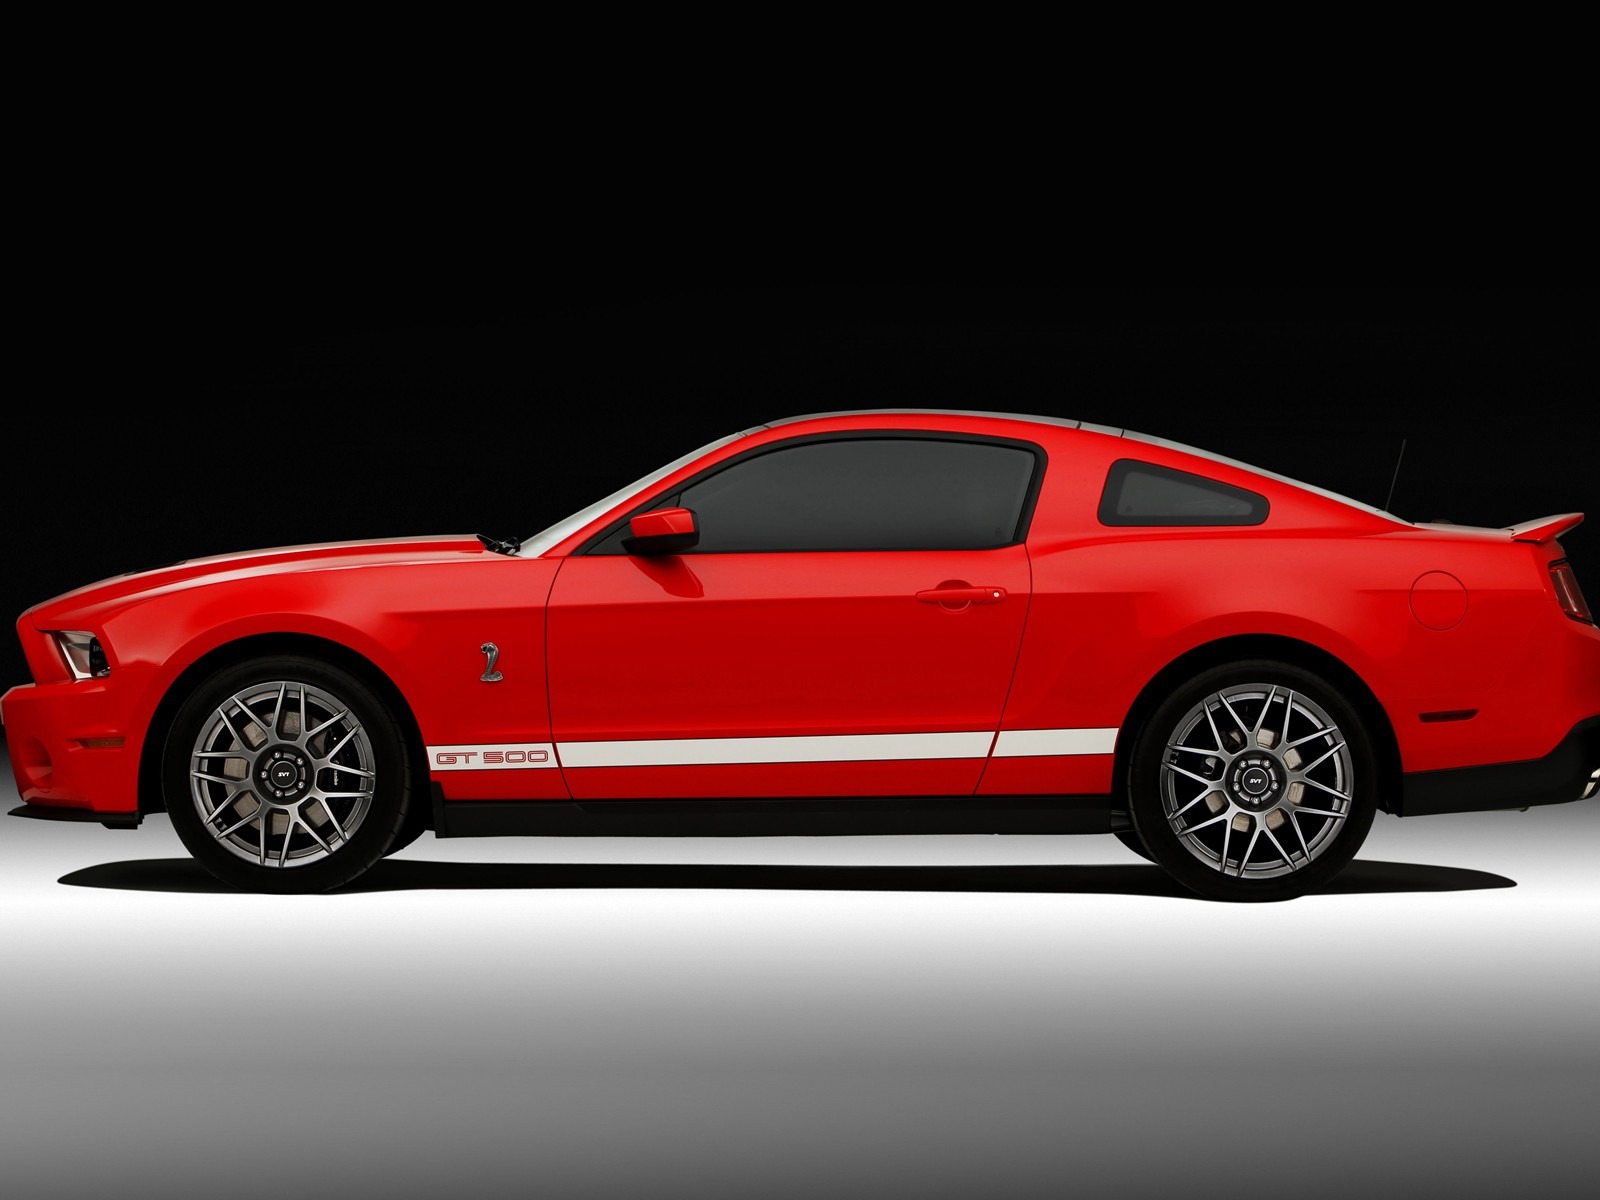 Ford Mustang GT500 Wallpapers #6 - 1600x1200